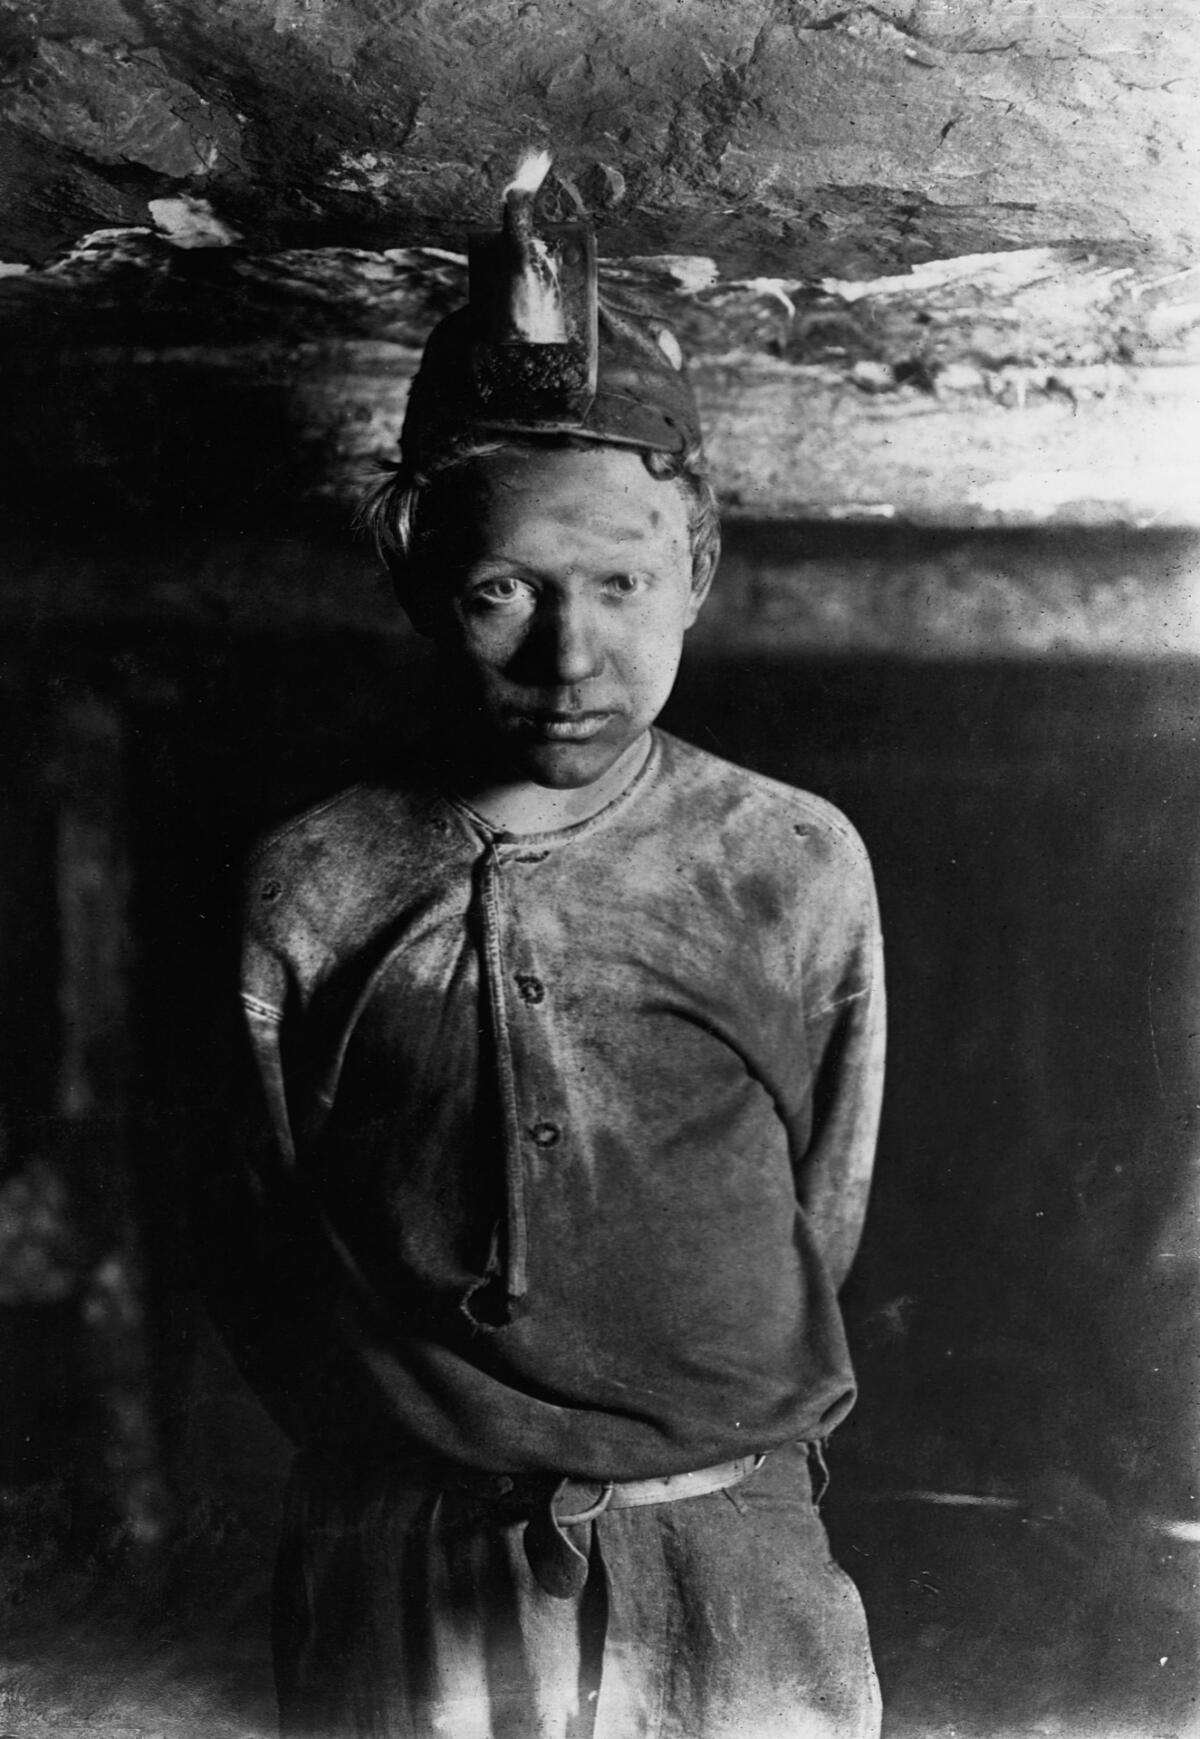 A young boy worked as a coal miner in Brown, West Virginia in 1908